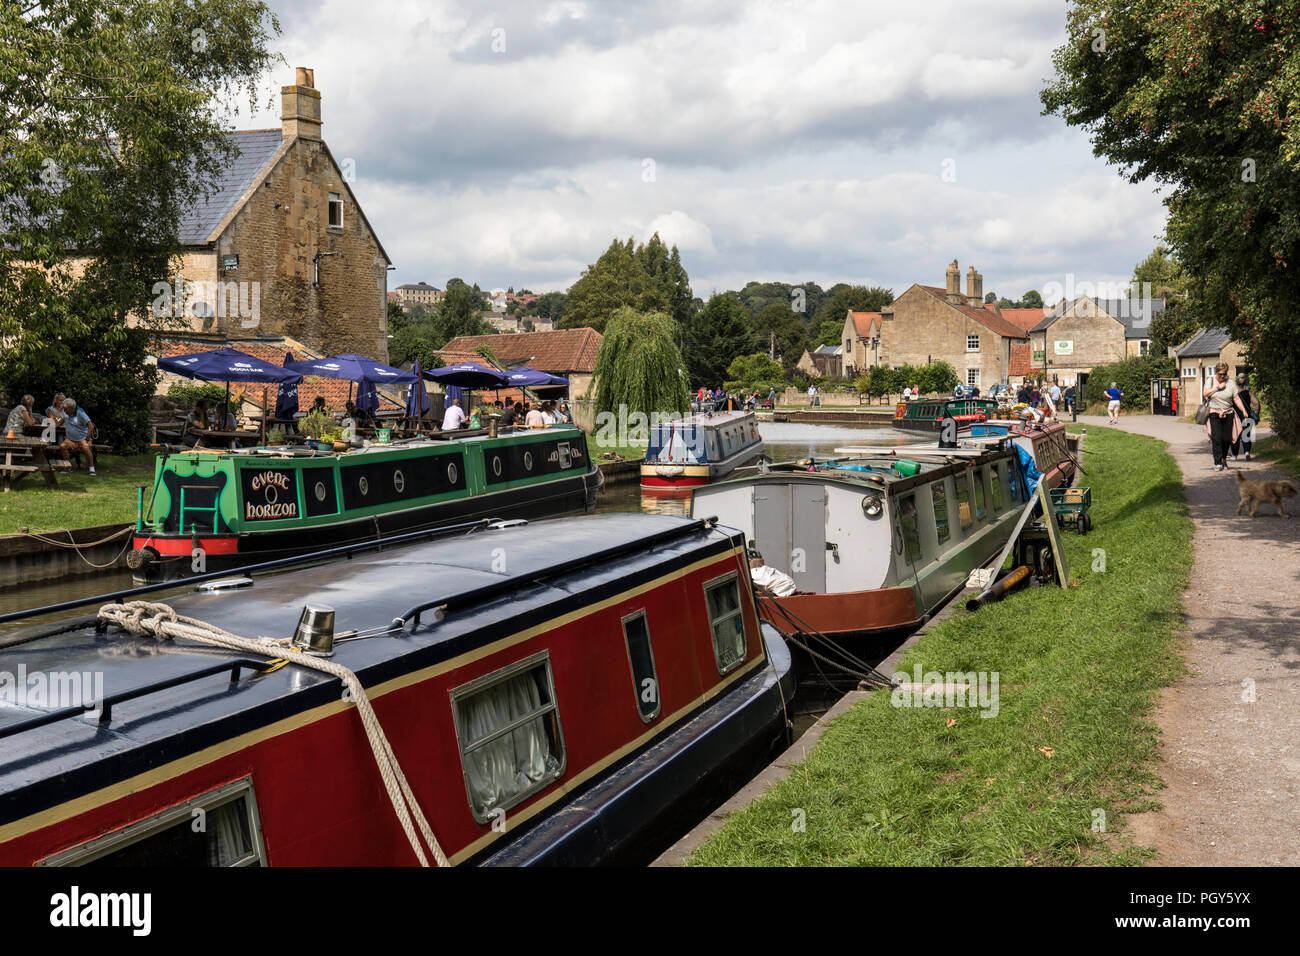 Canal boats at Bradford on Avon Wharf, Kennet and Avon Canal, Wiltshire, England, UK Stock Photo